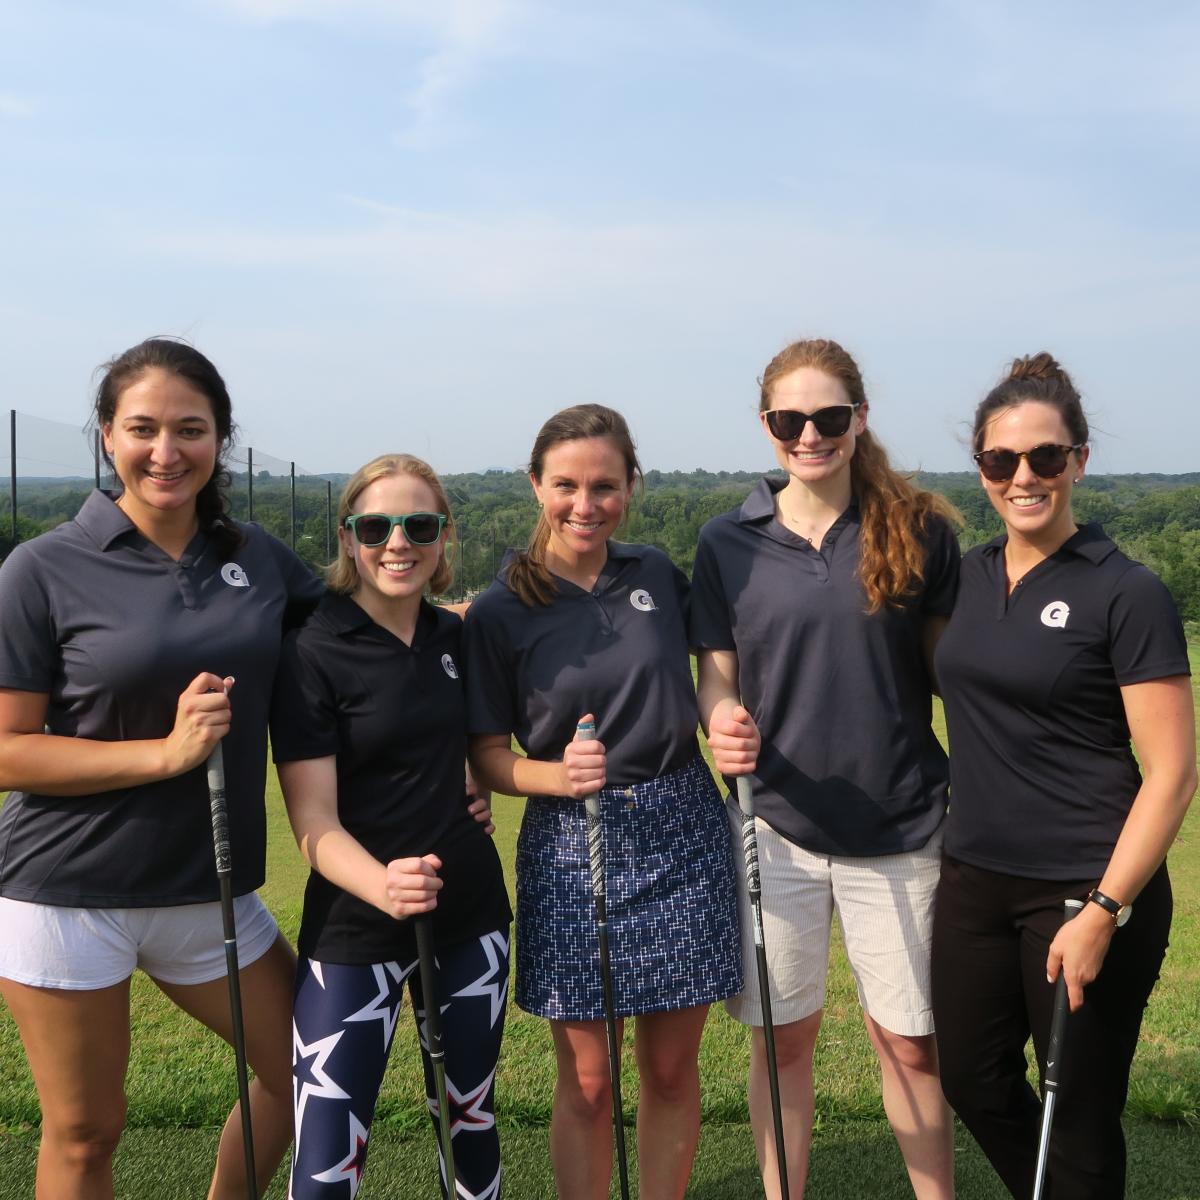 5 EMBA students in golf attire on golf course